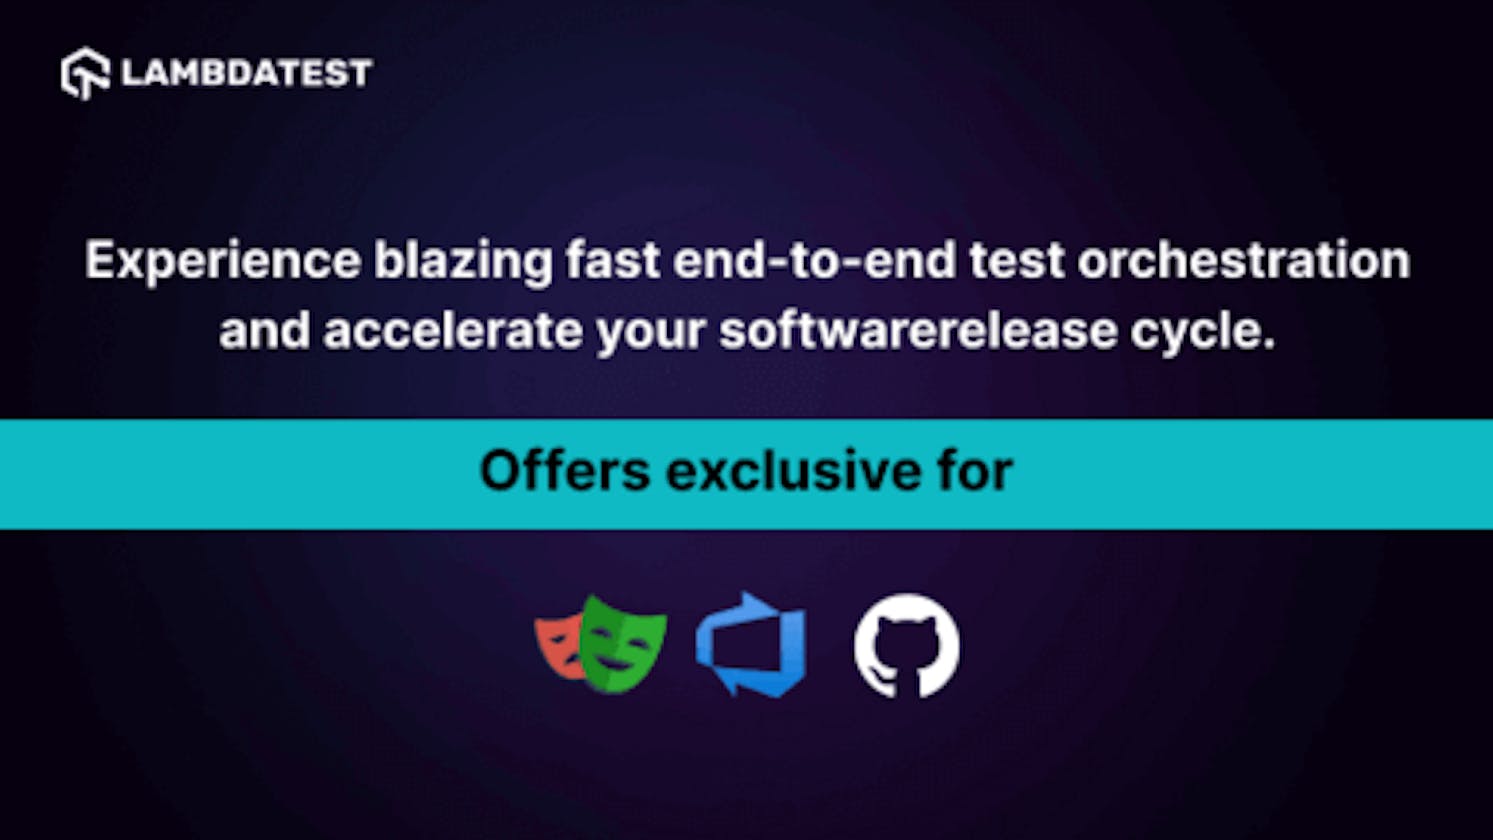 Experience blazing fast end-to-end test orchestration and accelerate your software release cycle